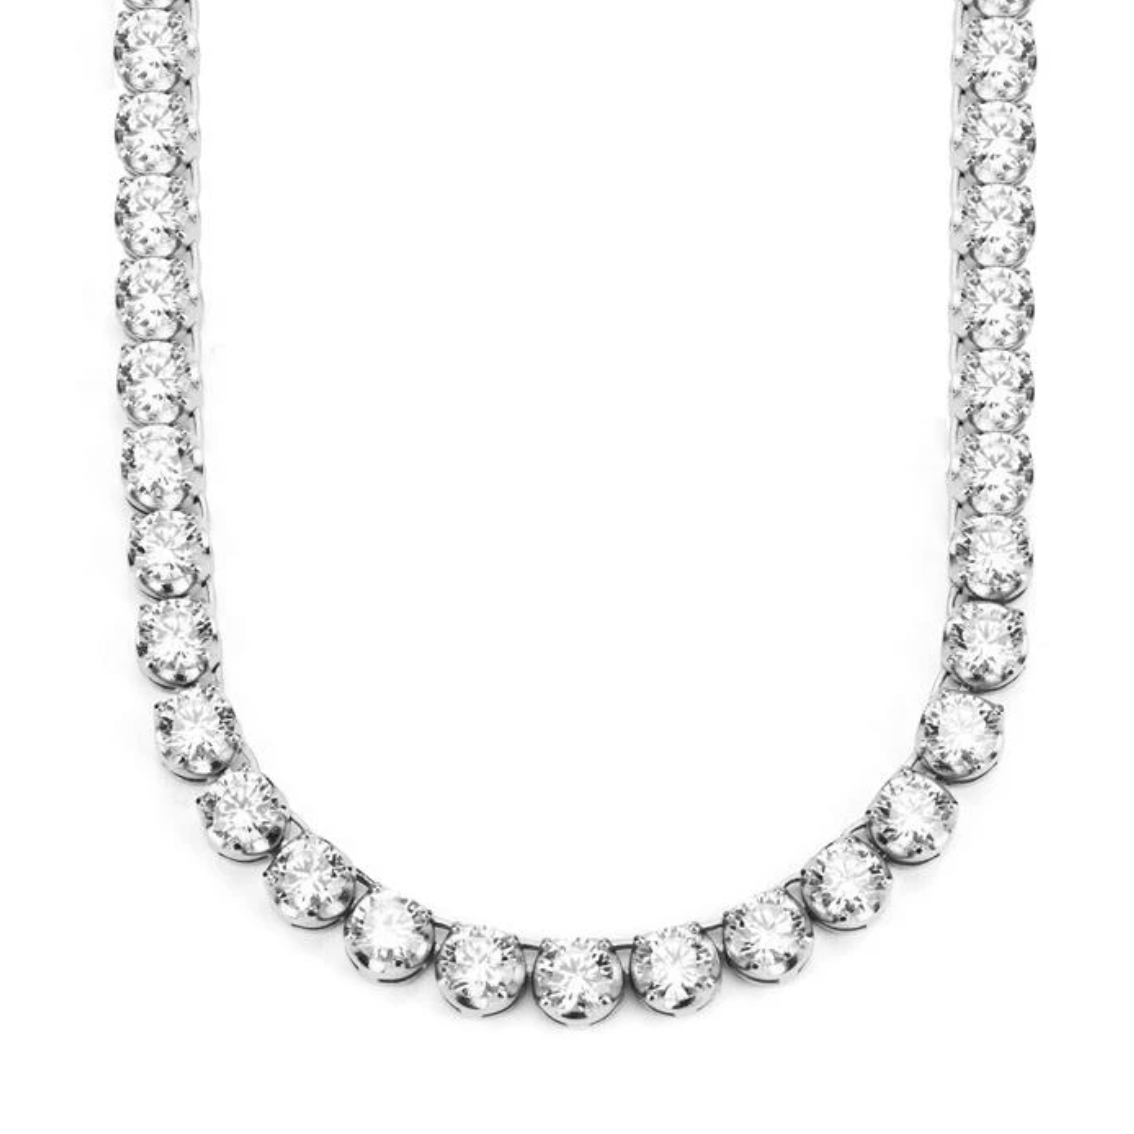 Buttercup Diamond Statement Tennis Necklace with Extenders